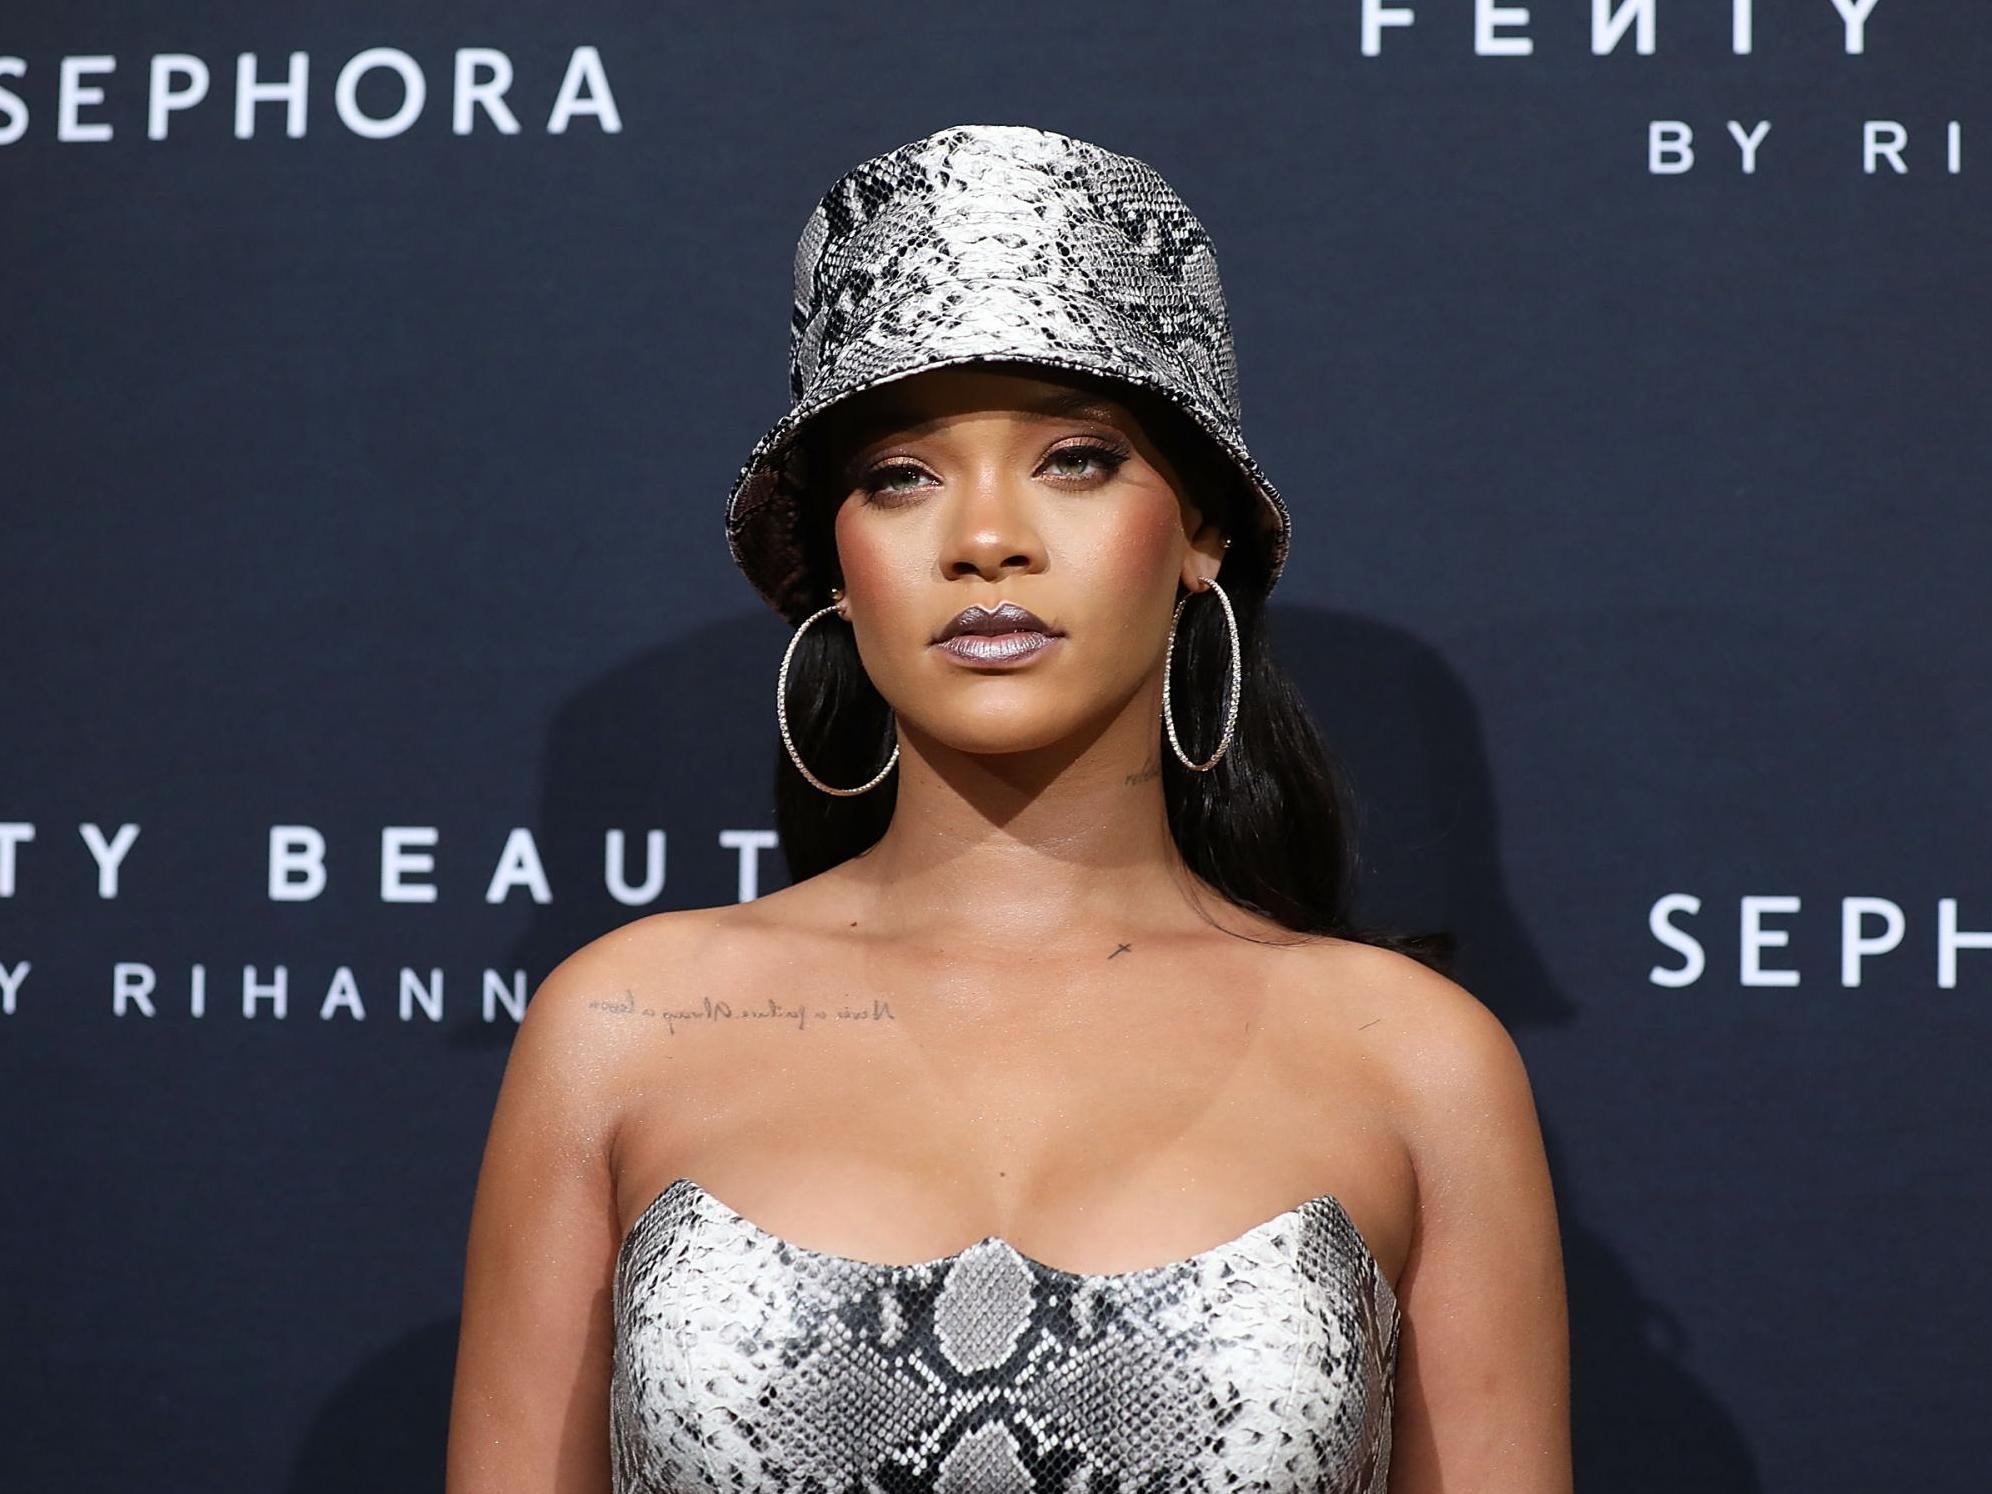 Rihanna Pulled Images From the 1960s 'Black Is Beautiful' Movement for  Fenty's Campaign - Fashionista